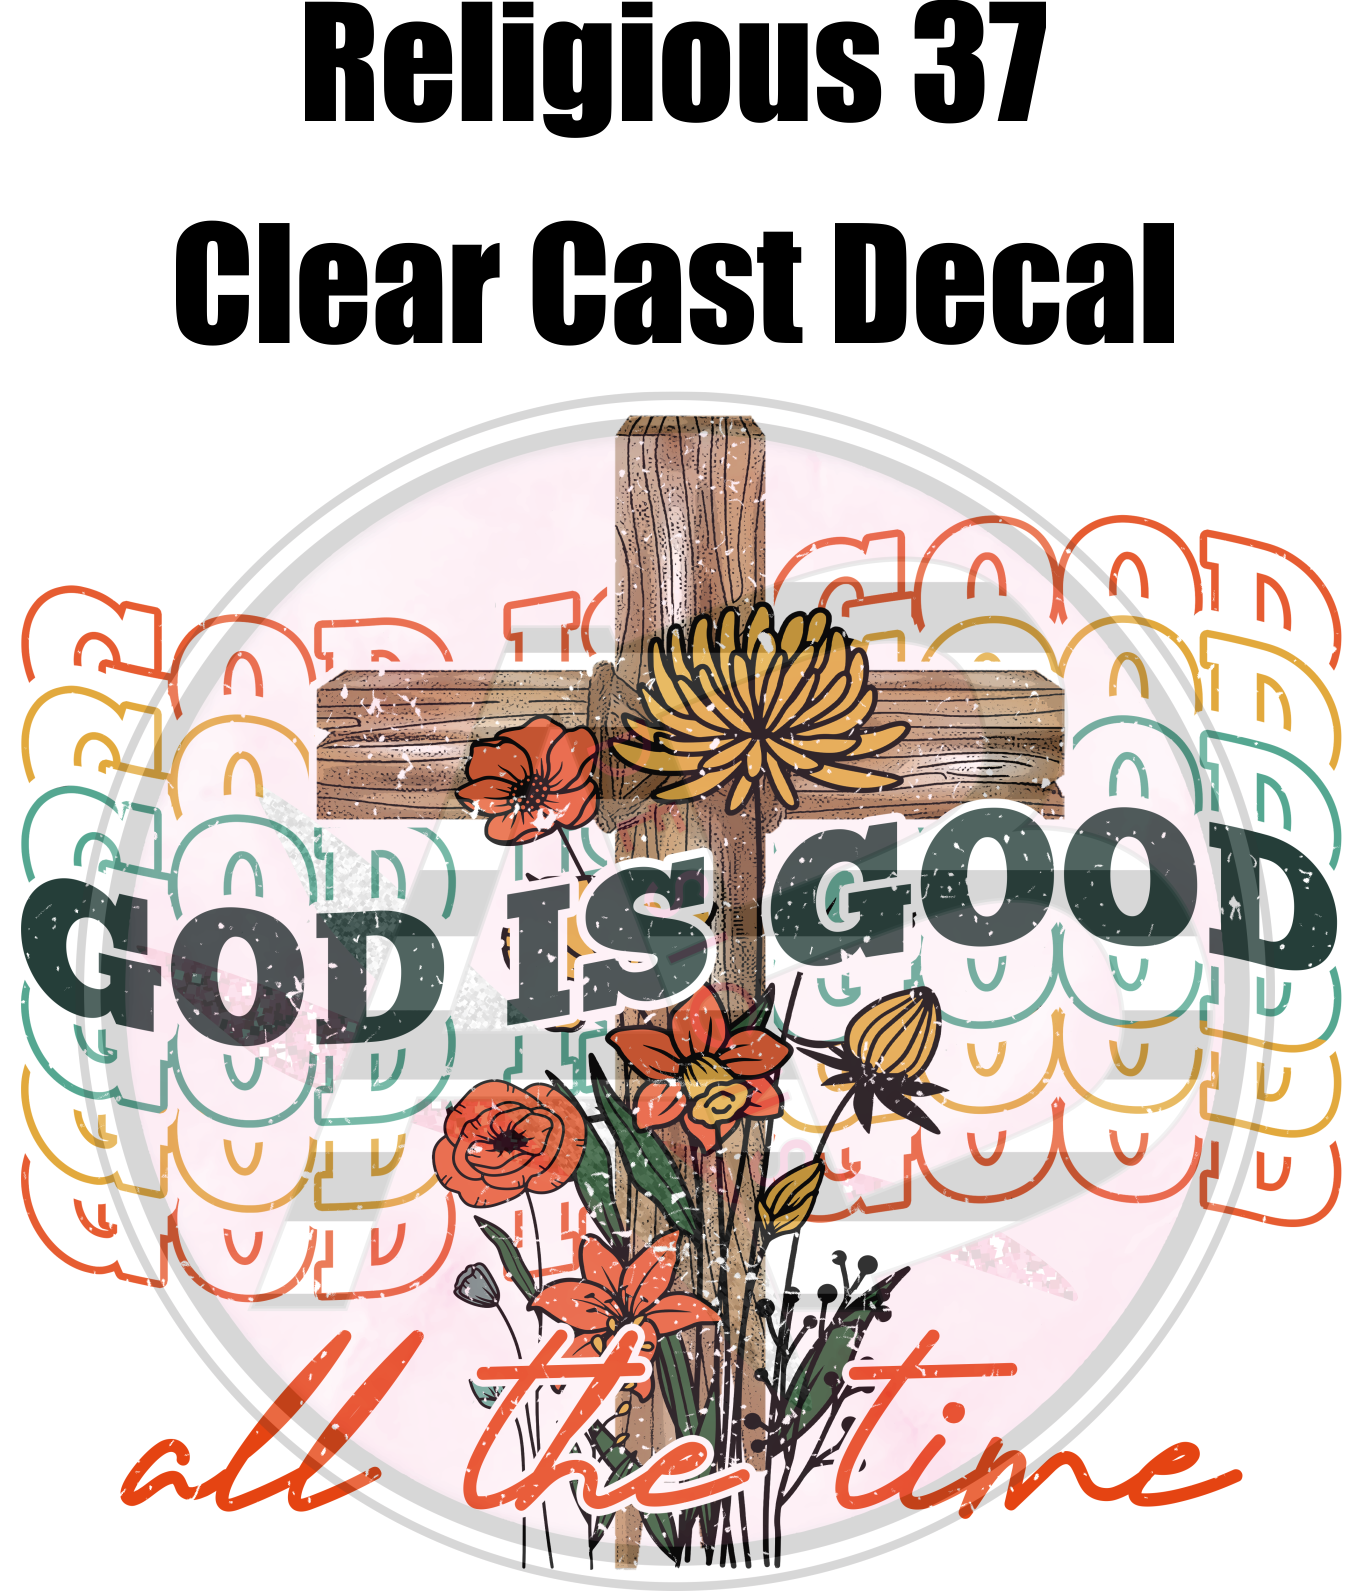 Religious 37 - Clear Cast Decal